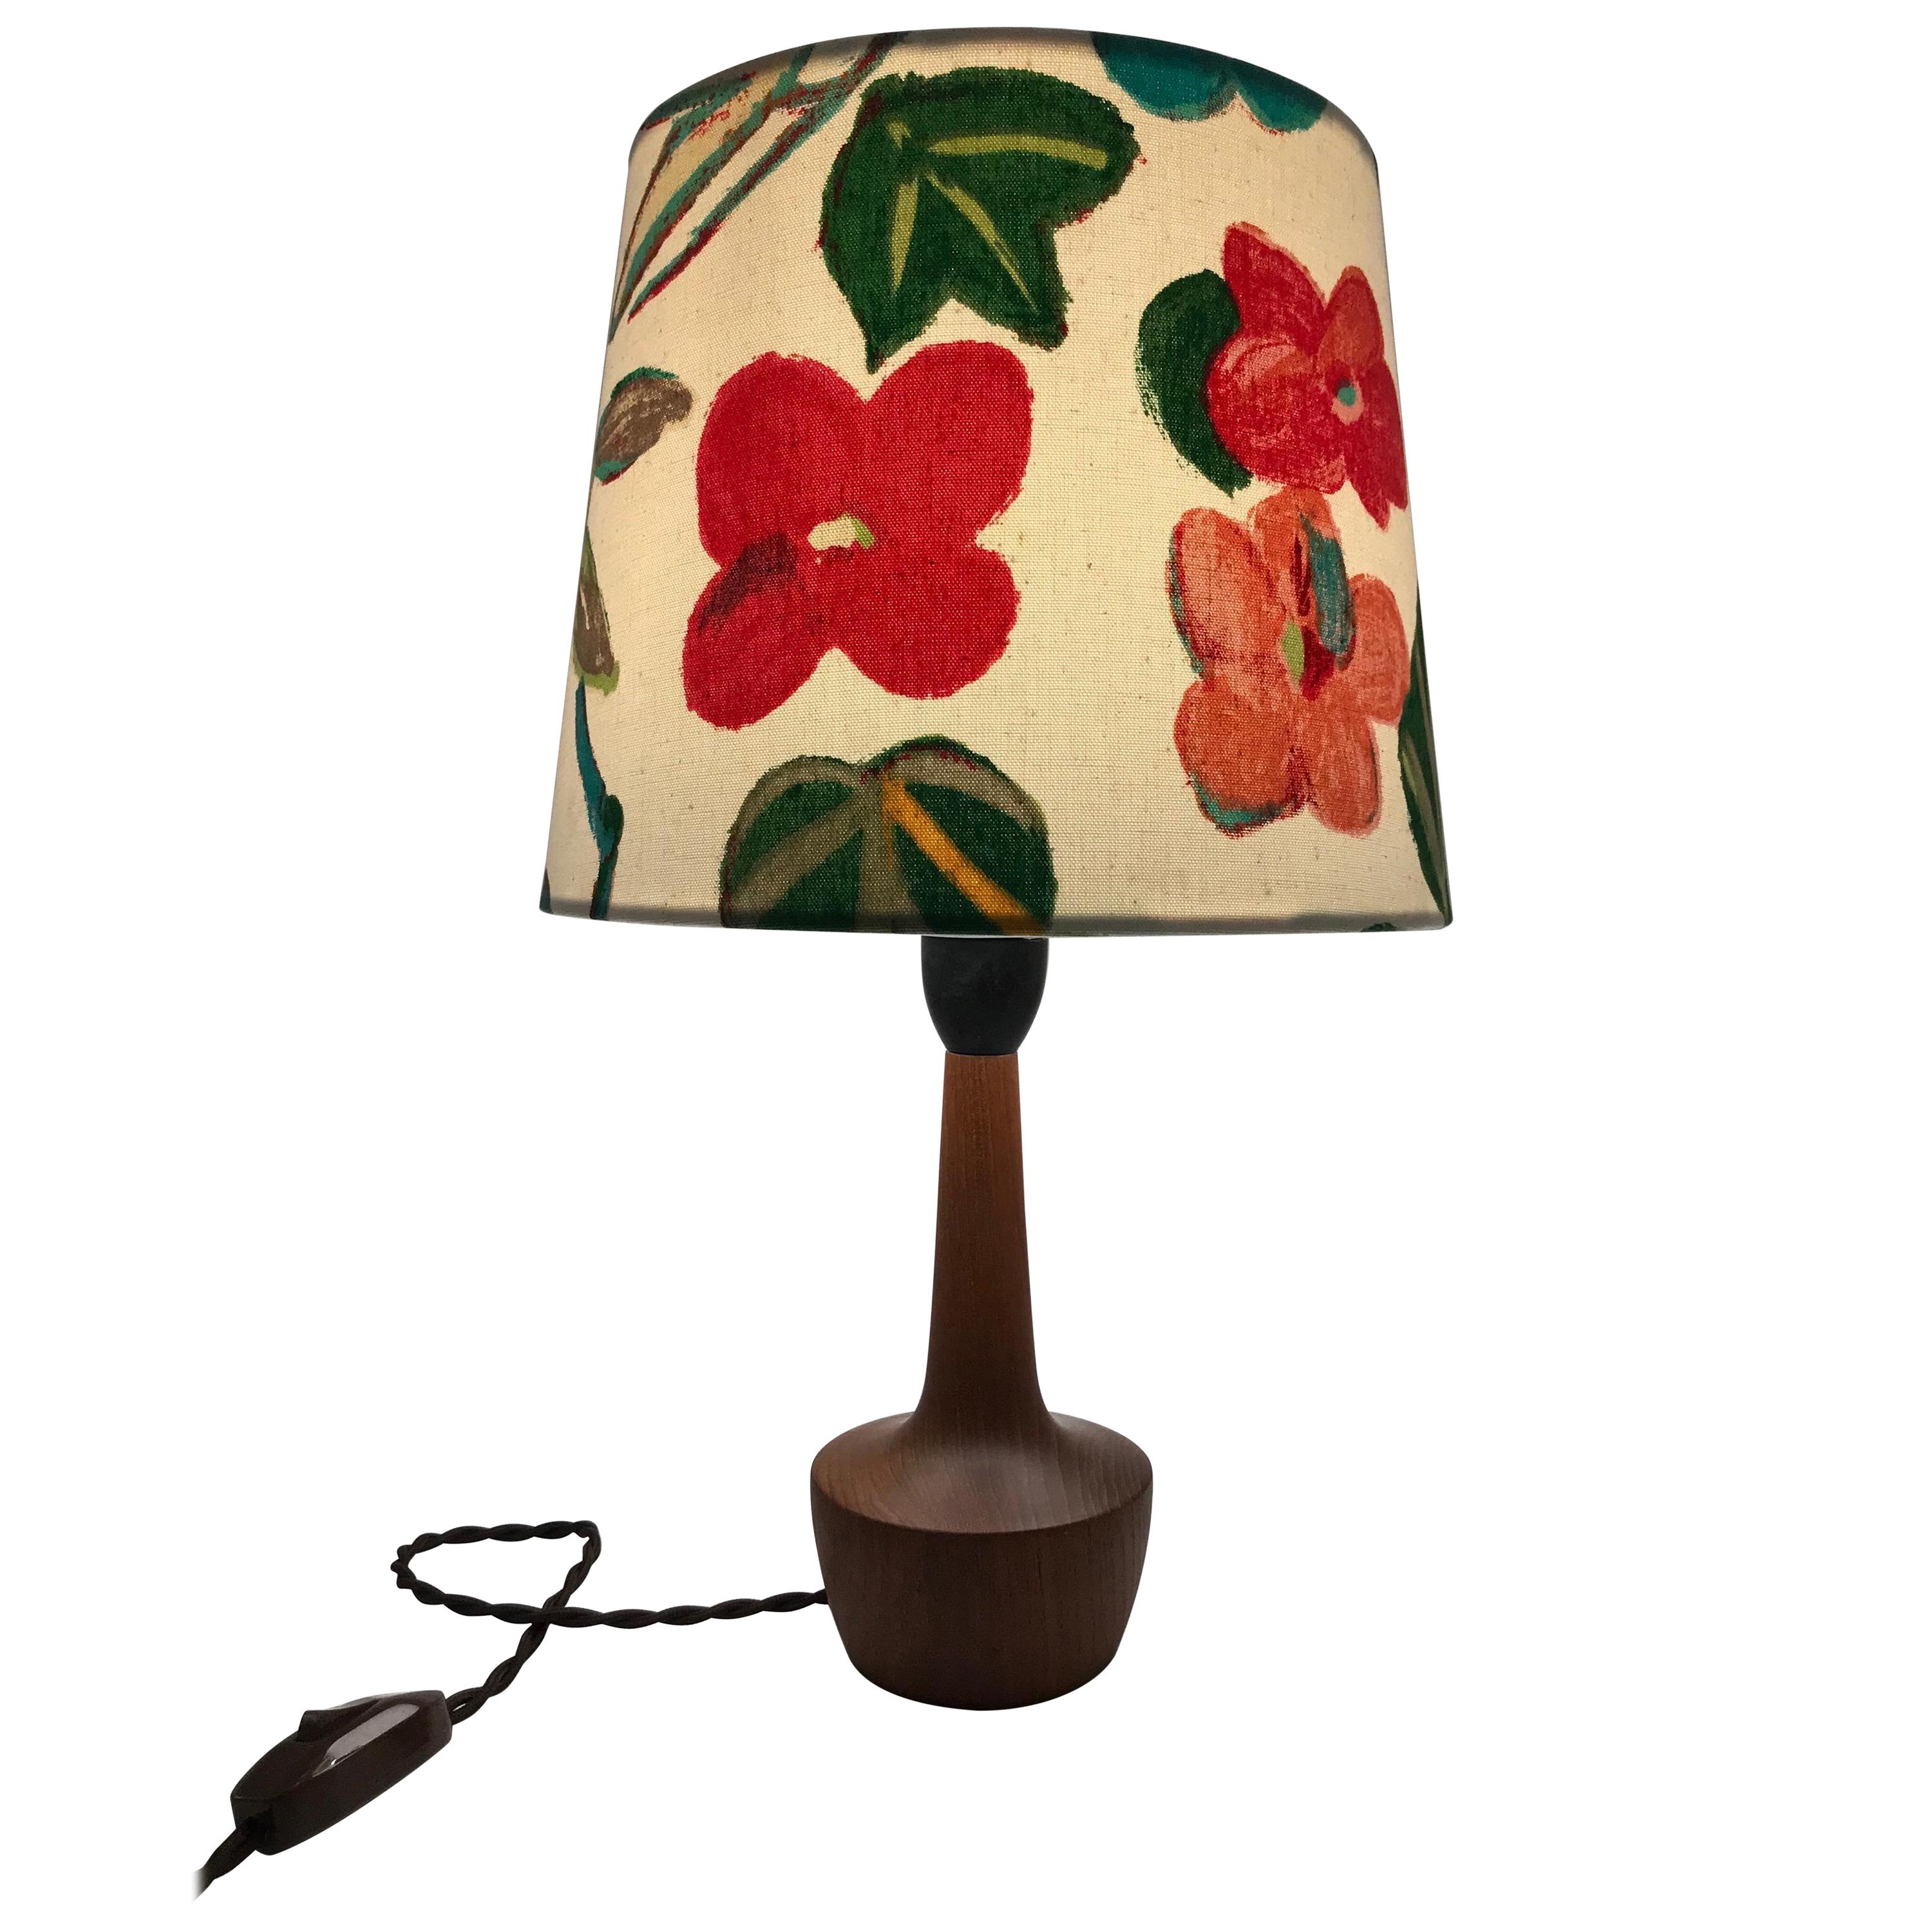 Danish Mid-Century Modern Solid Teak Table Lamp with an Artbymay Lamp Shade